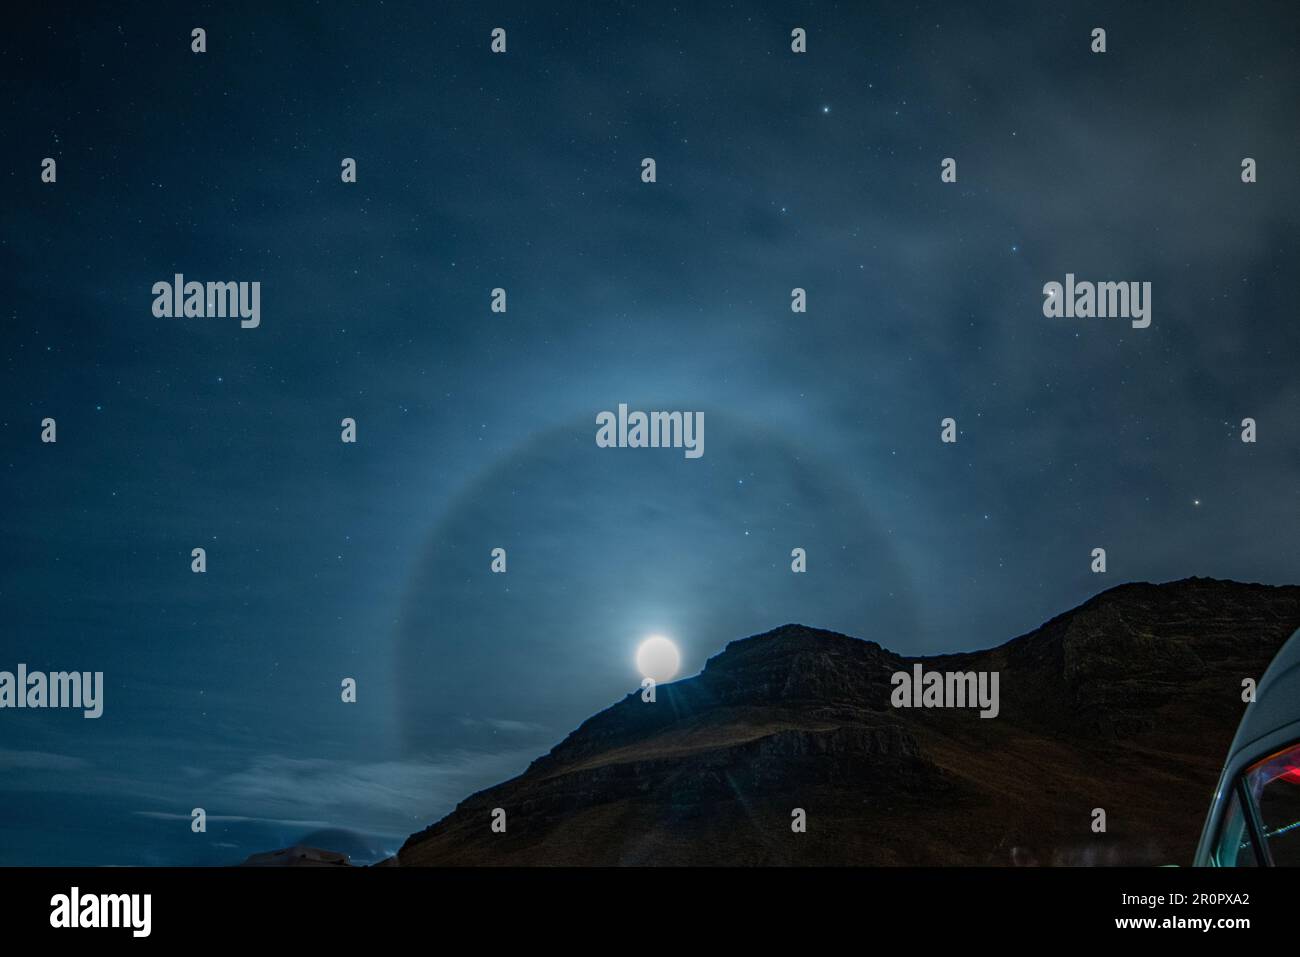 A scenic view of the Moon halo with a mountain in the foreground. Stock Photo